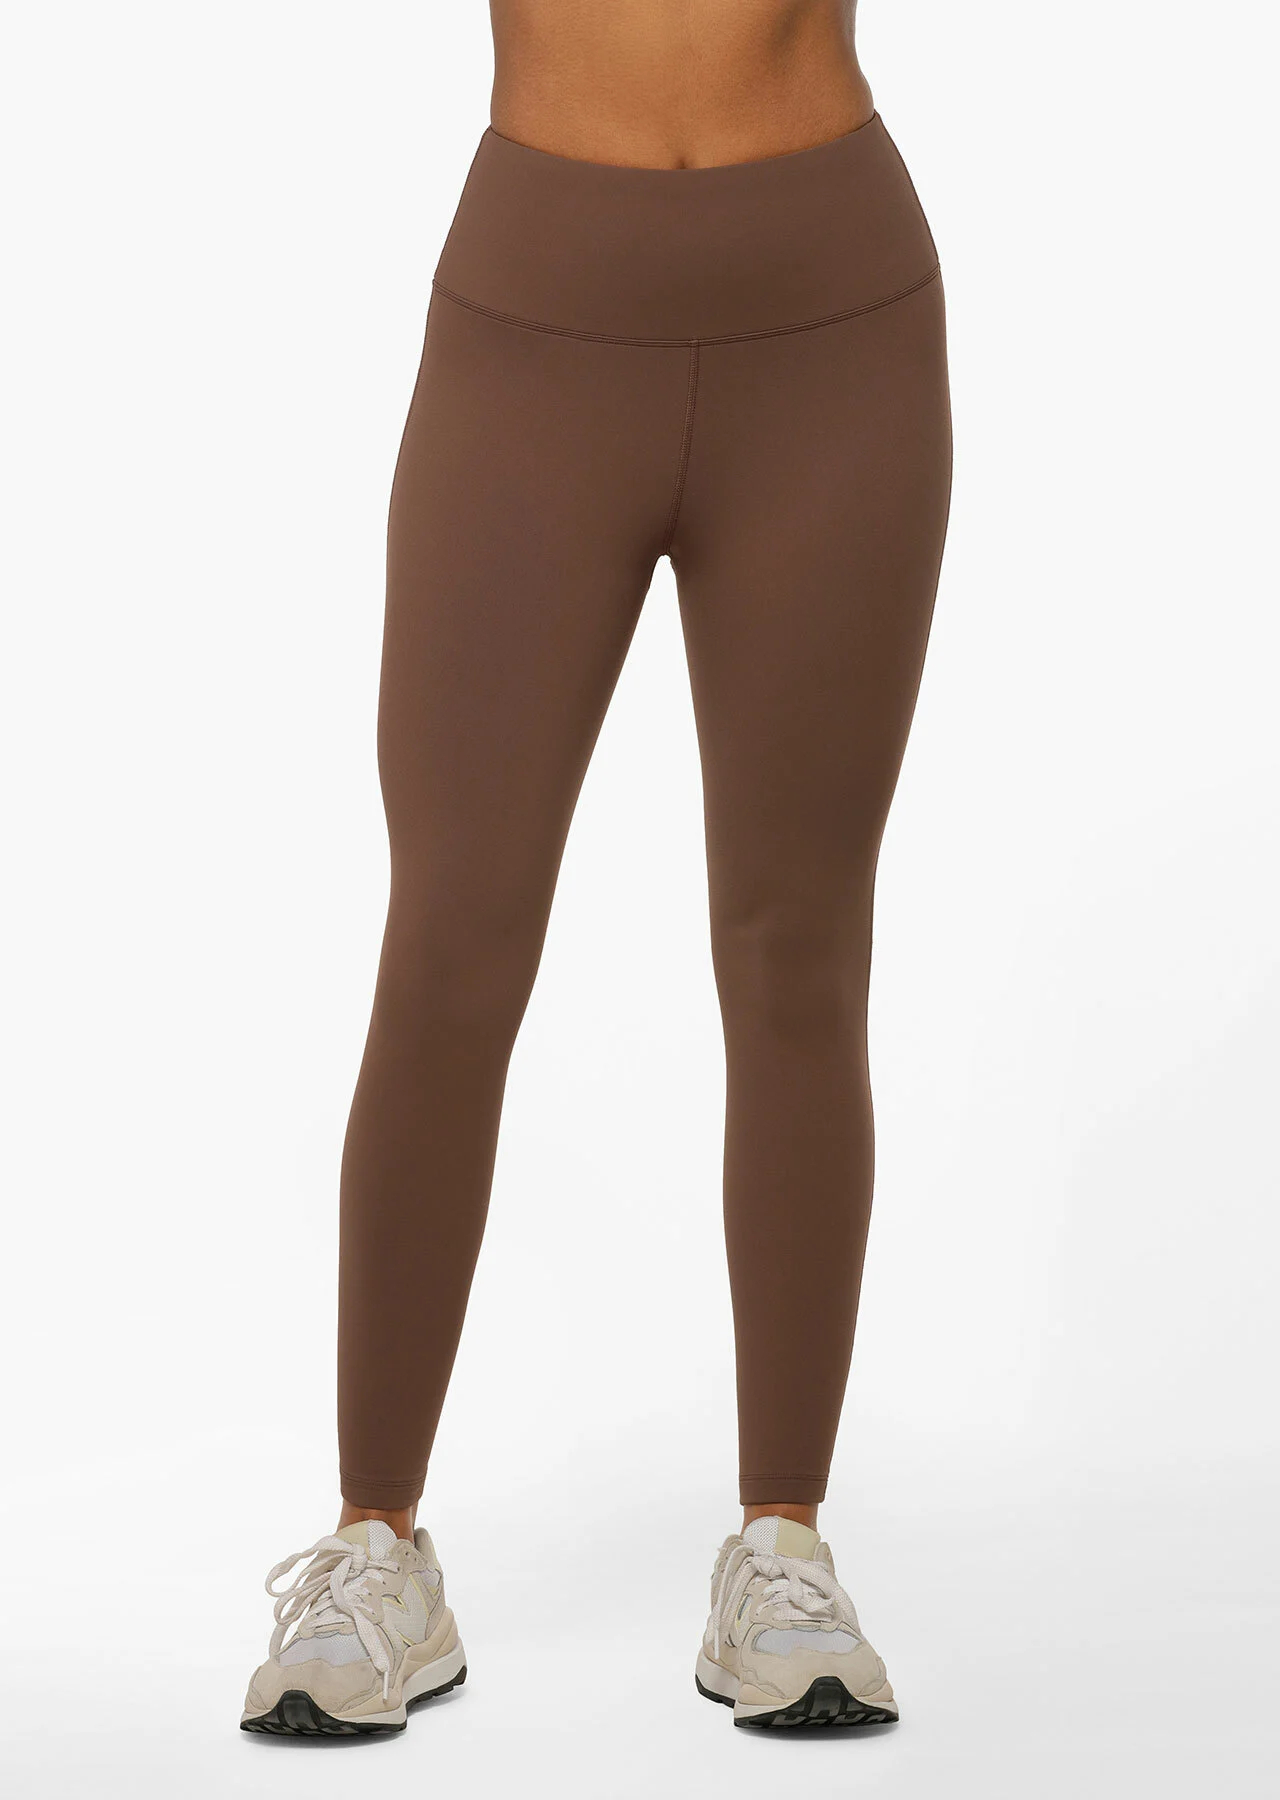 Brown leggings for women – How to Style them to Look Good插图2